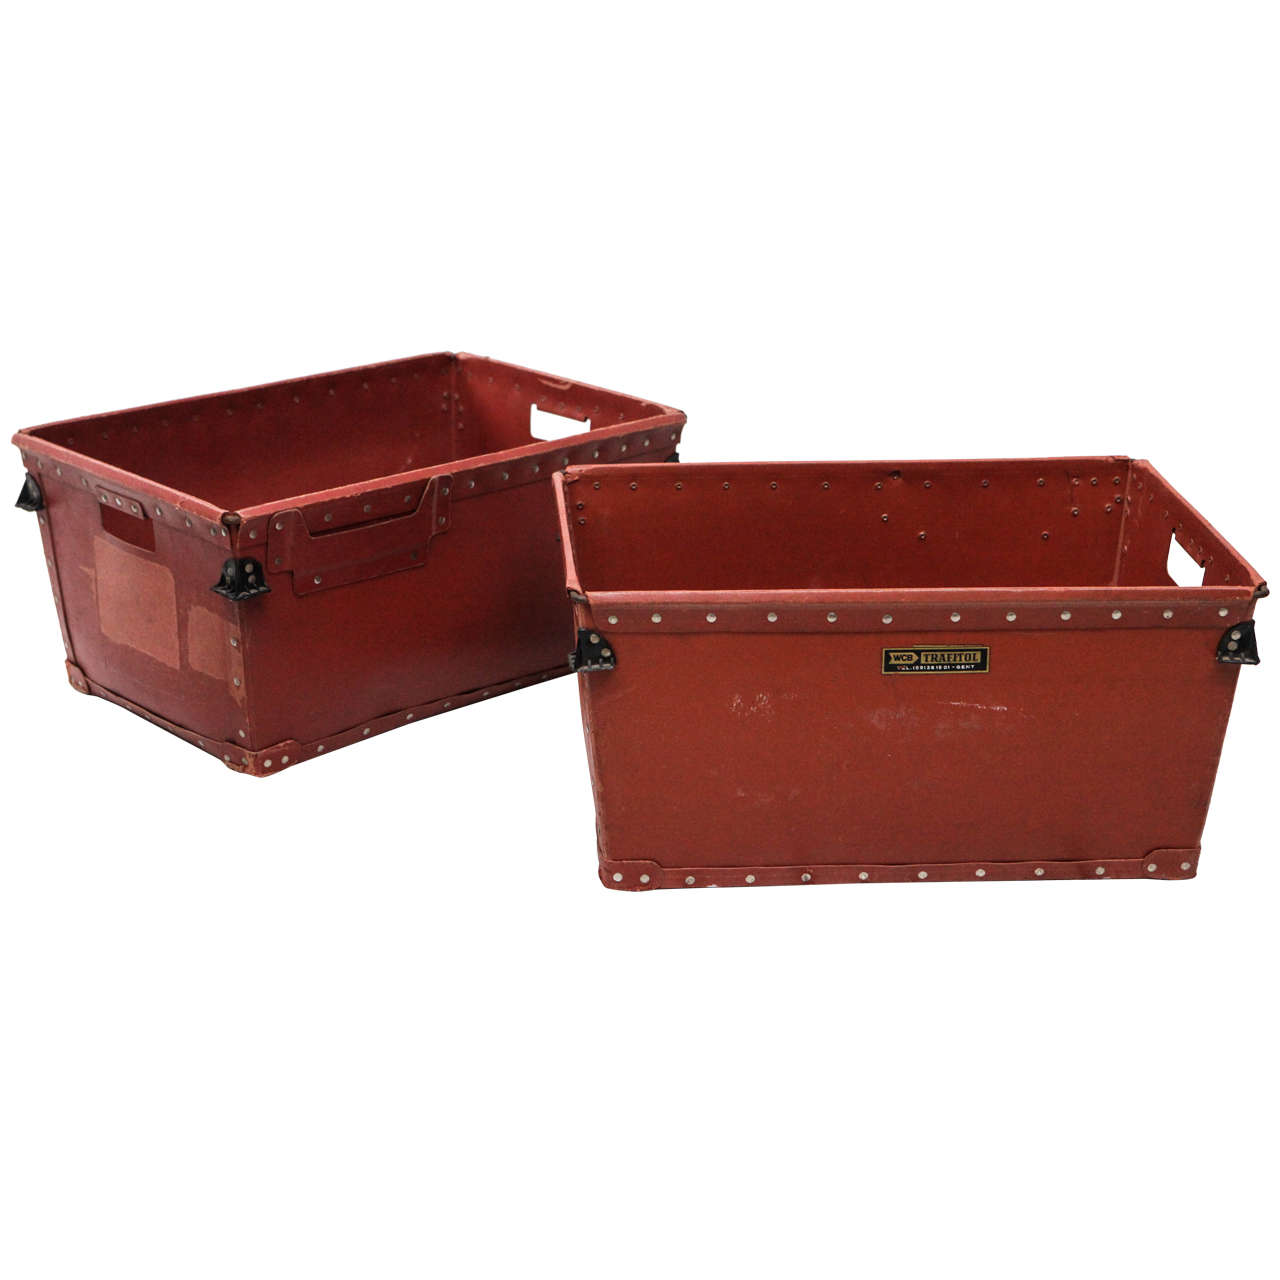 Industrial Red Storage Bins by Trafitol (Four Available)